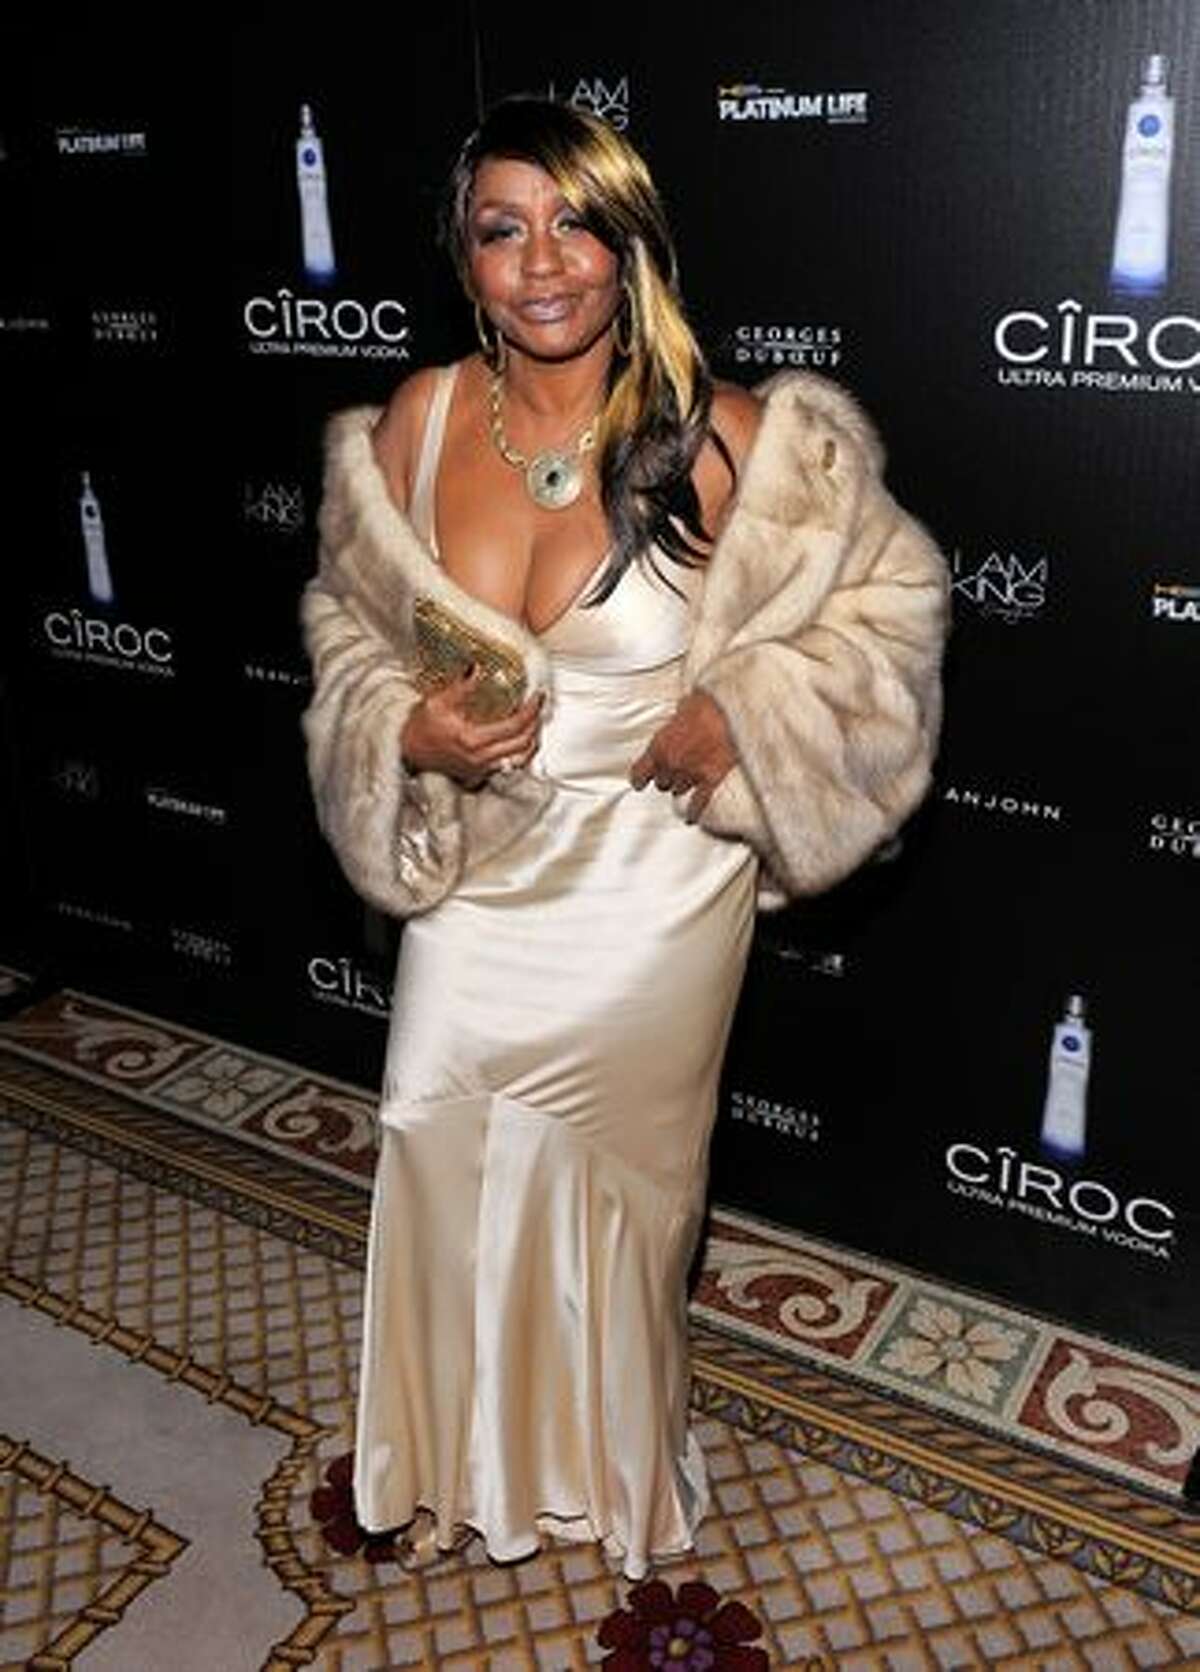 Janice Combs attends the Sean "Diddy" Combs' Birthday Celebration Presented by Ciroc Vodka at The Grand Ballroom at The Plaza Hotel in New York City.